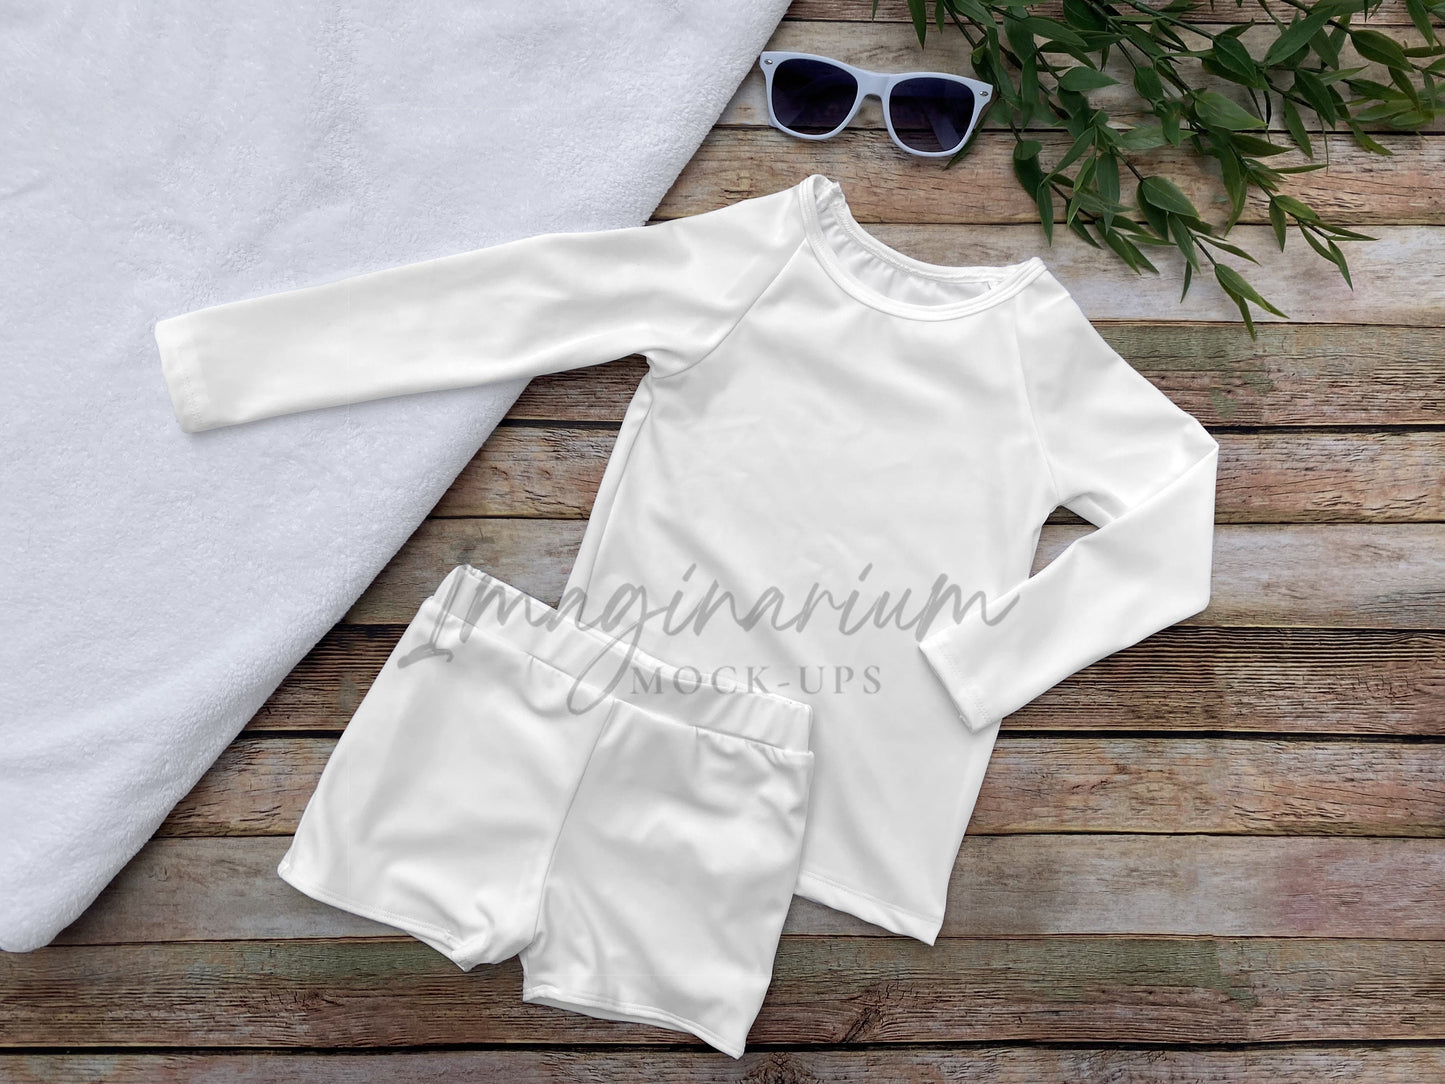 Rash Guard and Swim Briefs Styled Mock Up, Realistic Clothing Mockup for Photoshop and Procreate